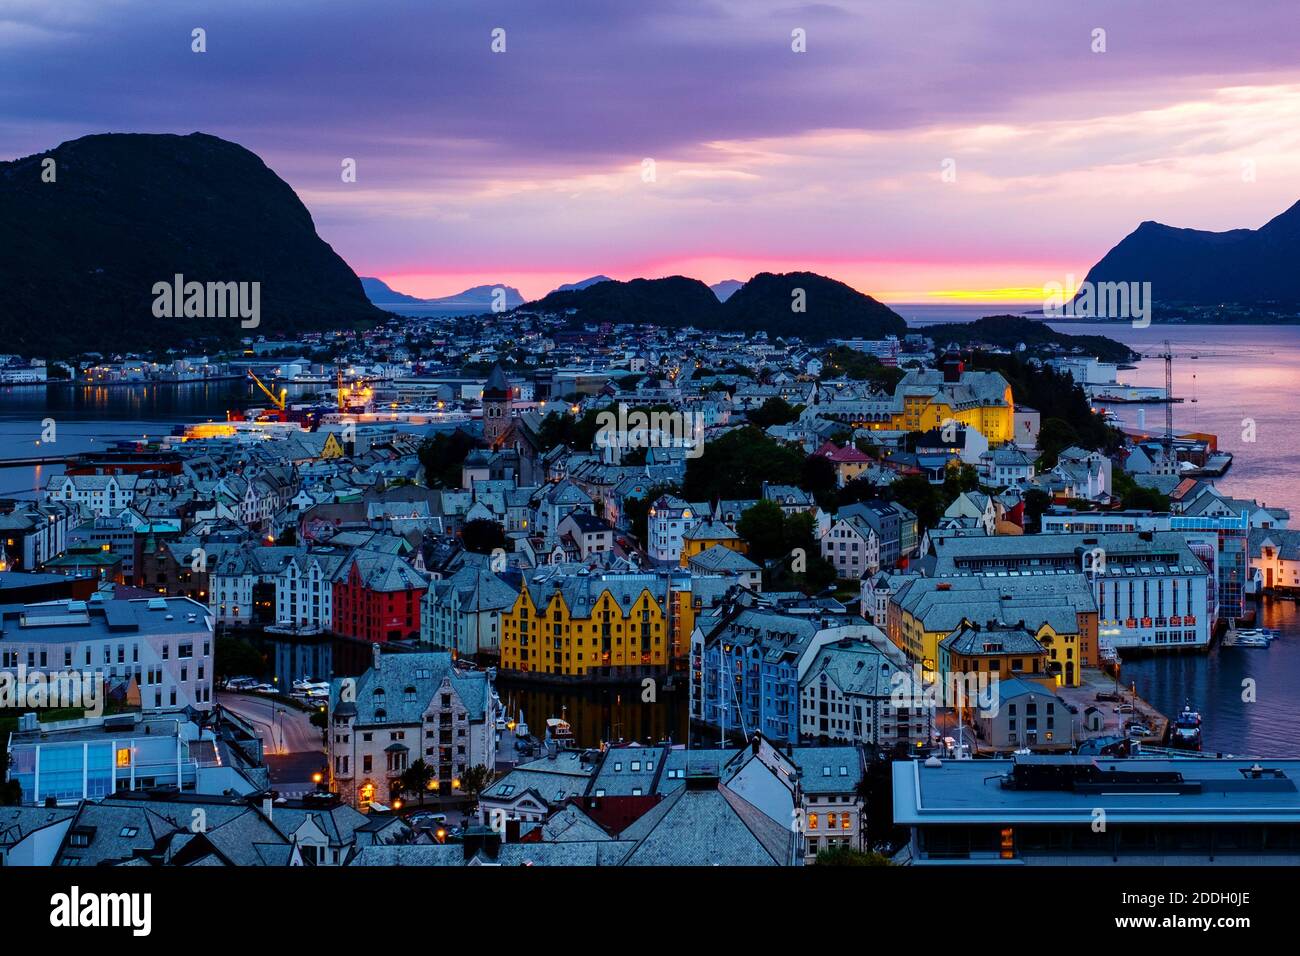 Alesund, Norway. Aerial view of Alesund, Norway at sunset. Colorful night sky over famous touristic destination with port and mountains Stock Photo